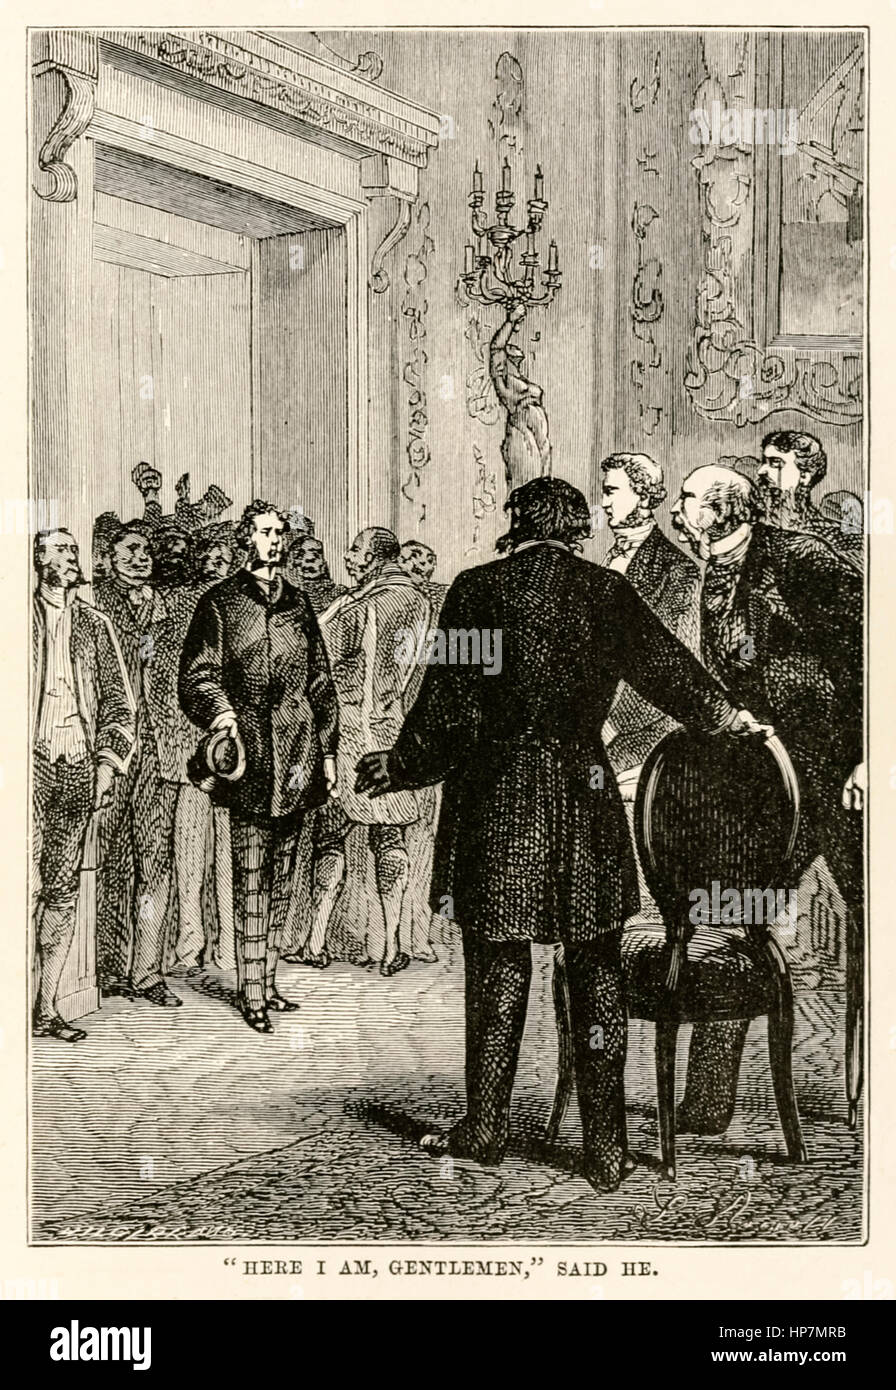 “”Here I am gentlemen,” said he.” from ‘Around the World in Eighty Days’ by Jules Verne (1828-1905) published in 1873 illustration by Léon Benett (1839-1917) and engraving by Henri-Théophile Hildebrand (1824-1897). Stock Photo